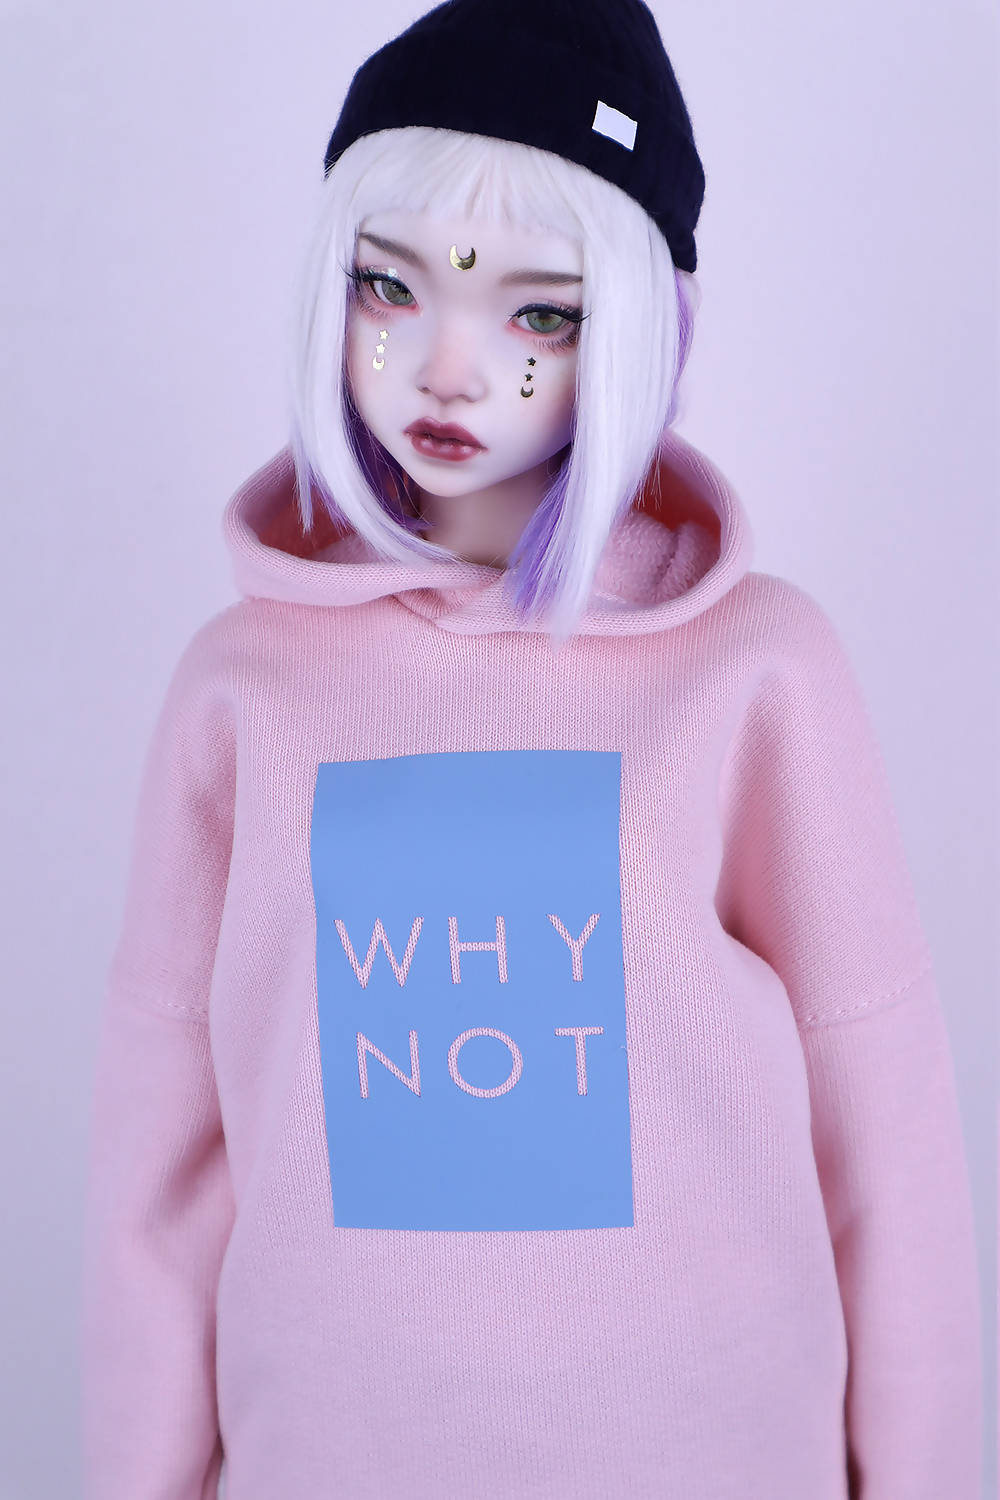 Pink hoodie "Why Not" for Feeple60 (SD13)